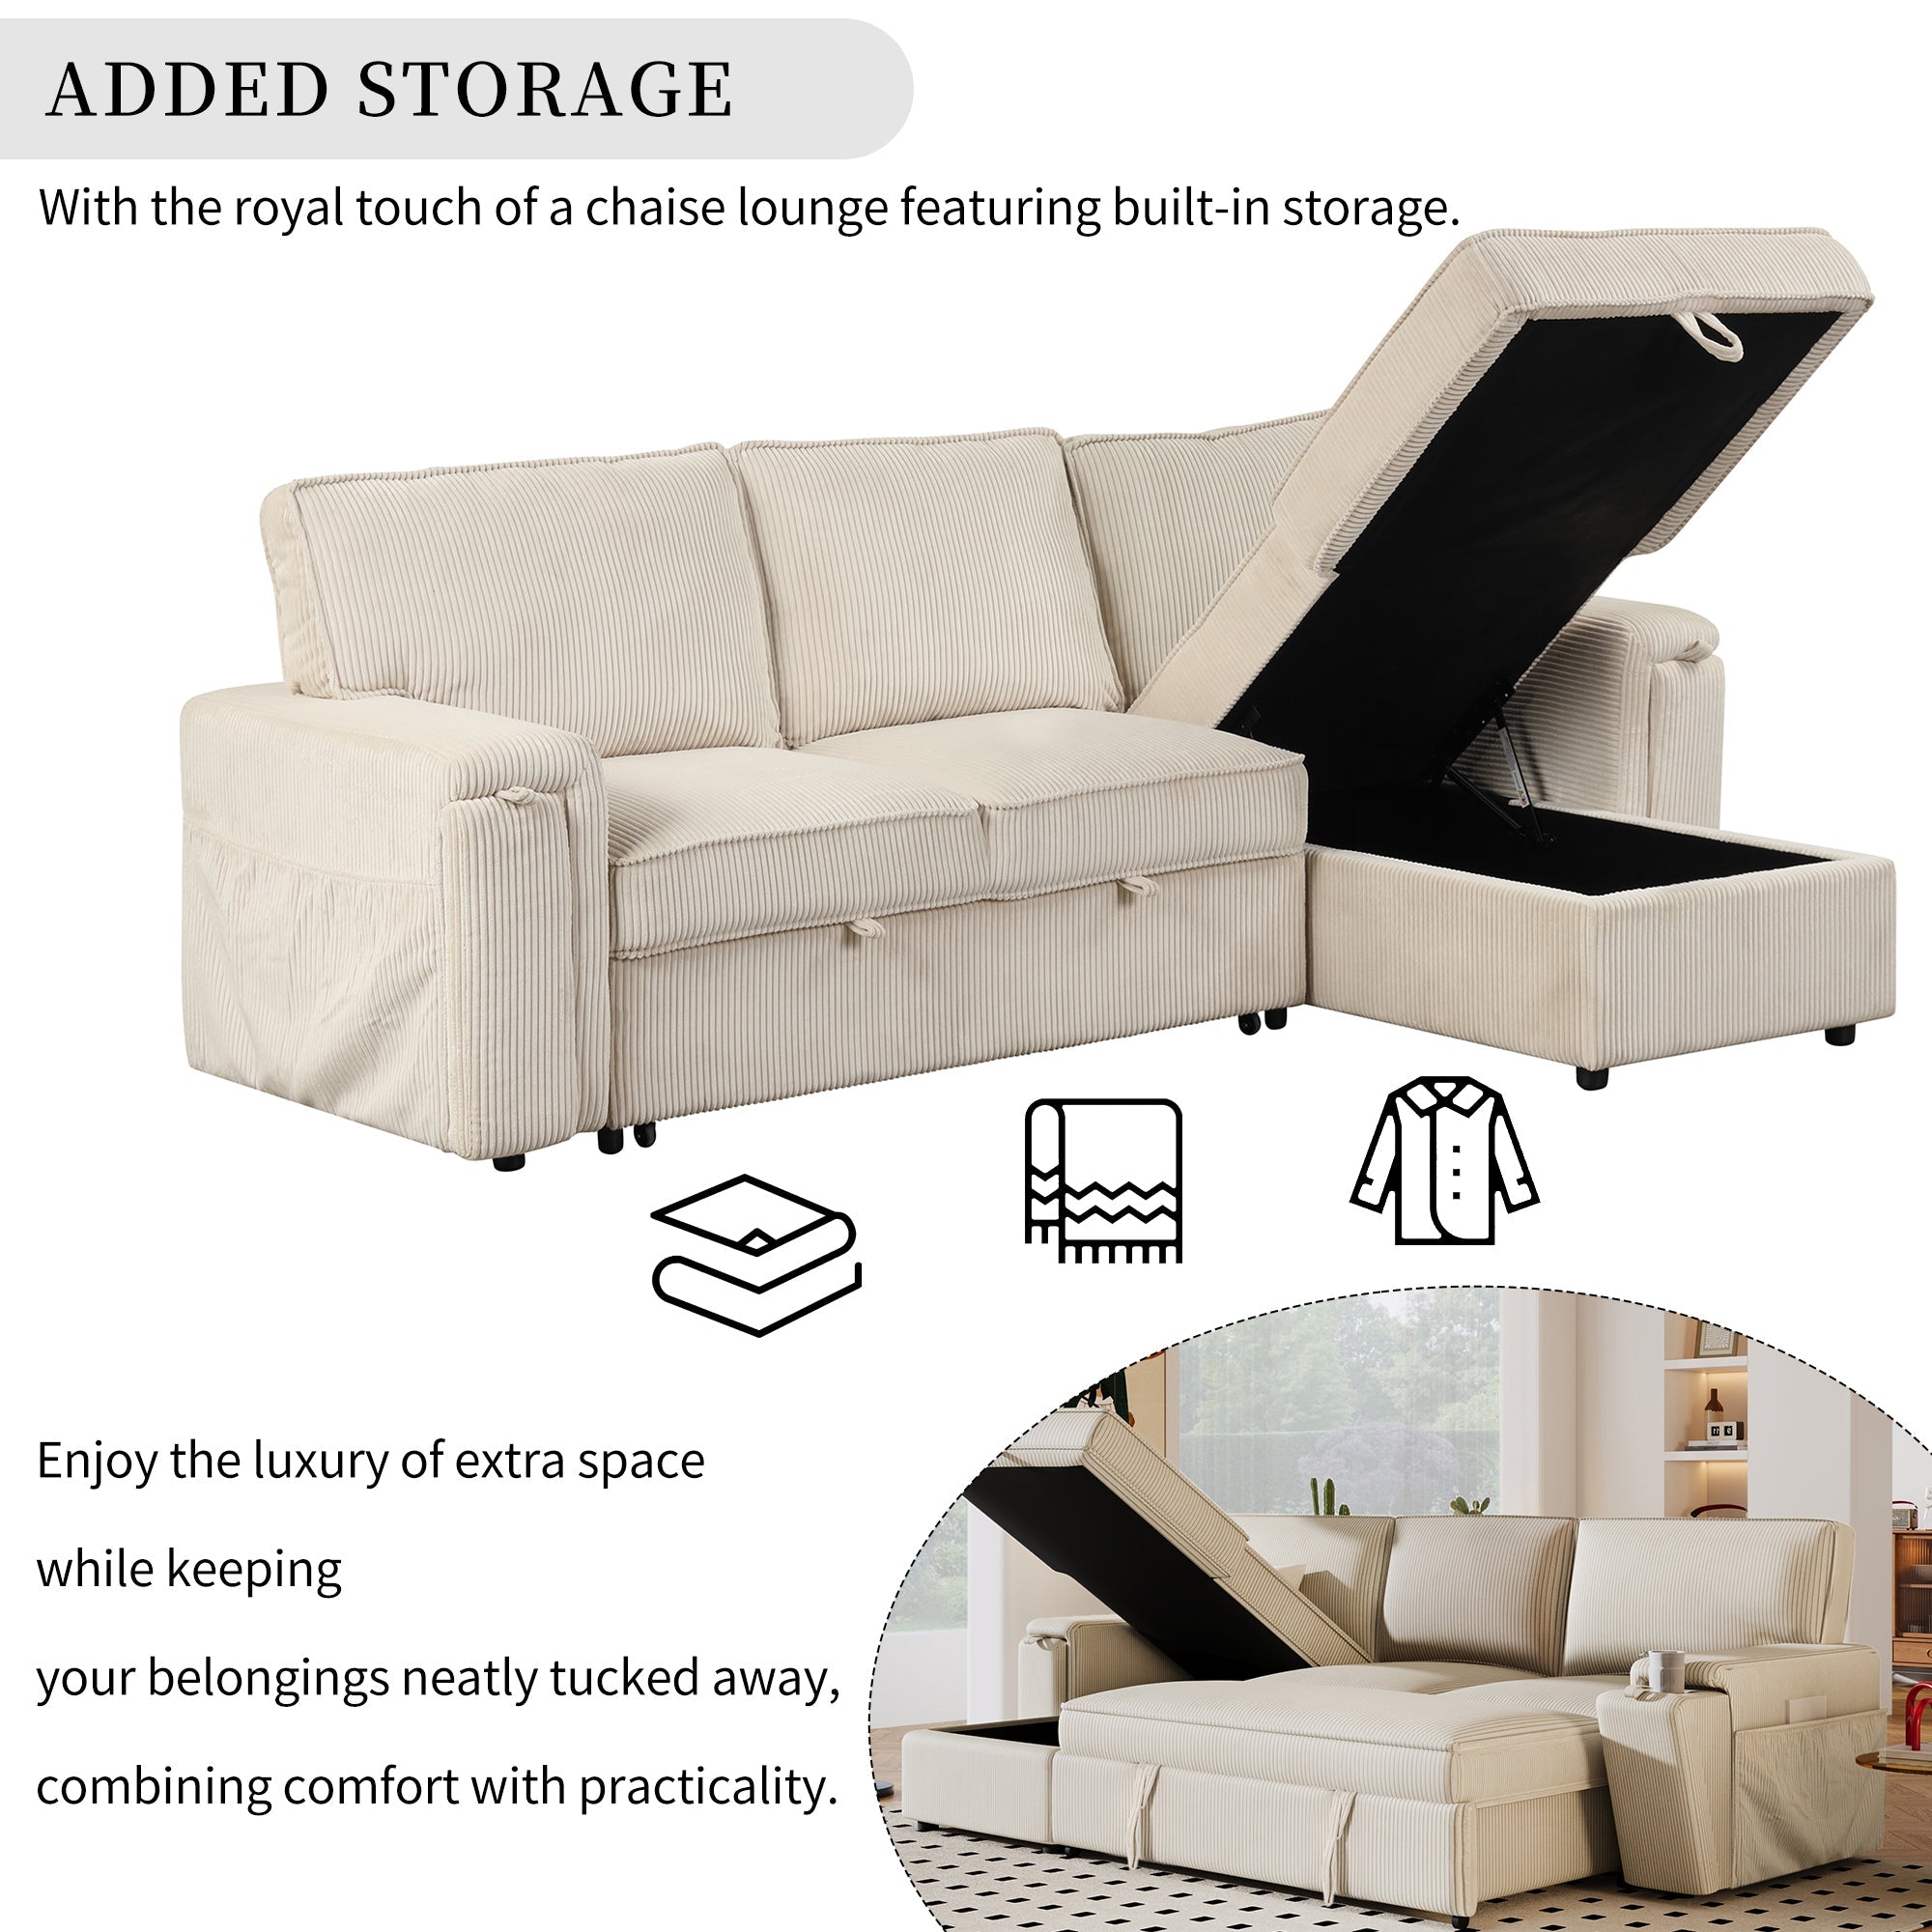 Upholstery Sleeper Sectional Sofa: Storage Bags, 2 Cup Holders on Arms Beige-Sleeper Sectionals-American Furniture Outlet